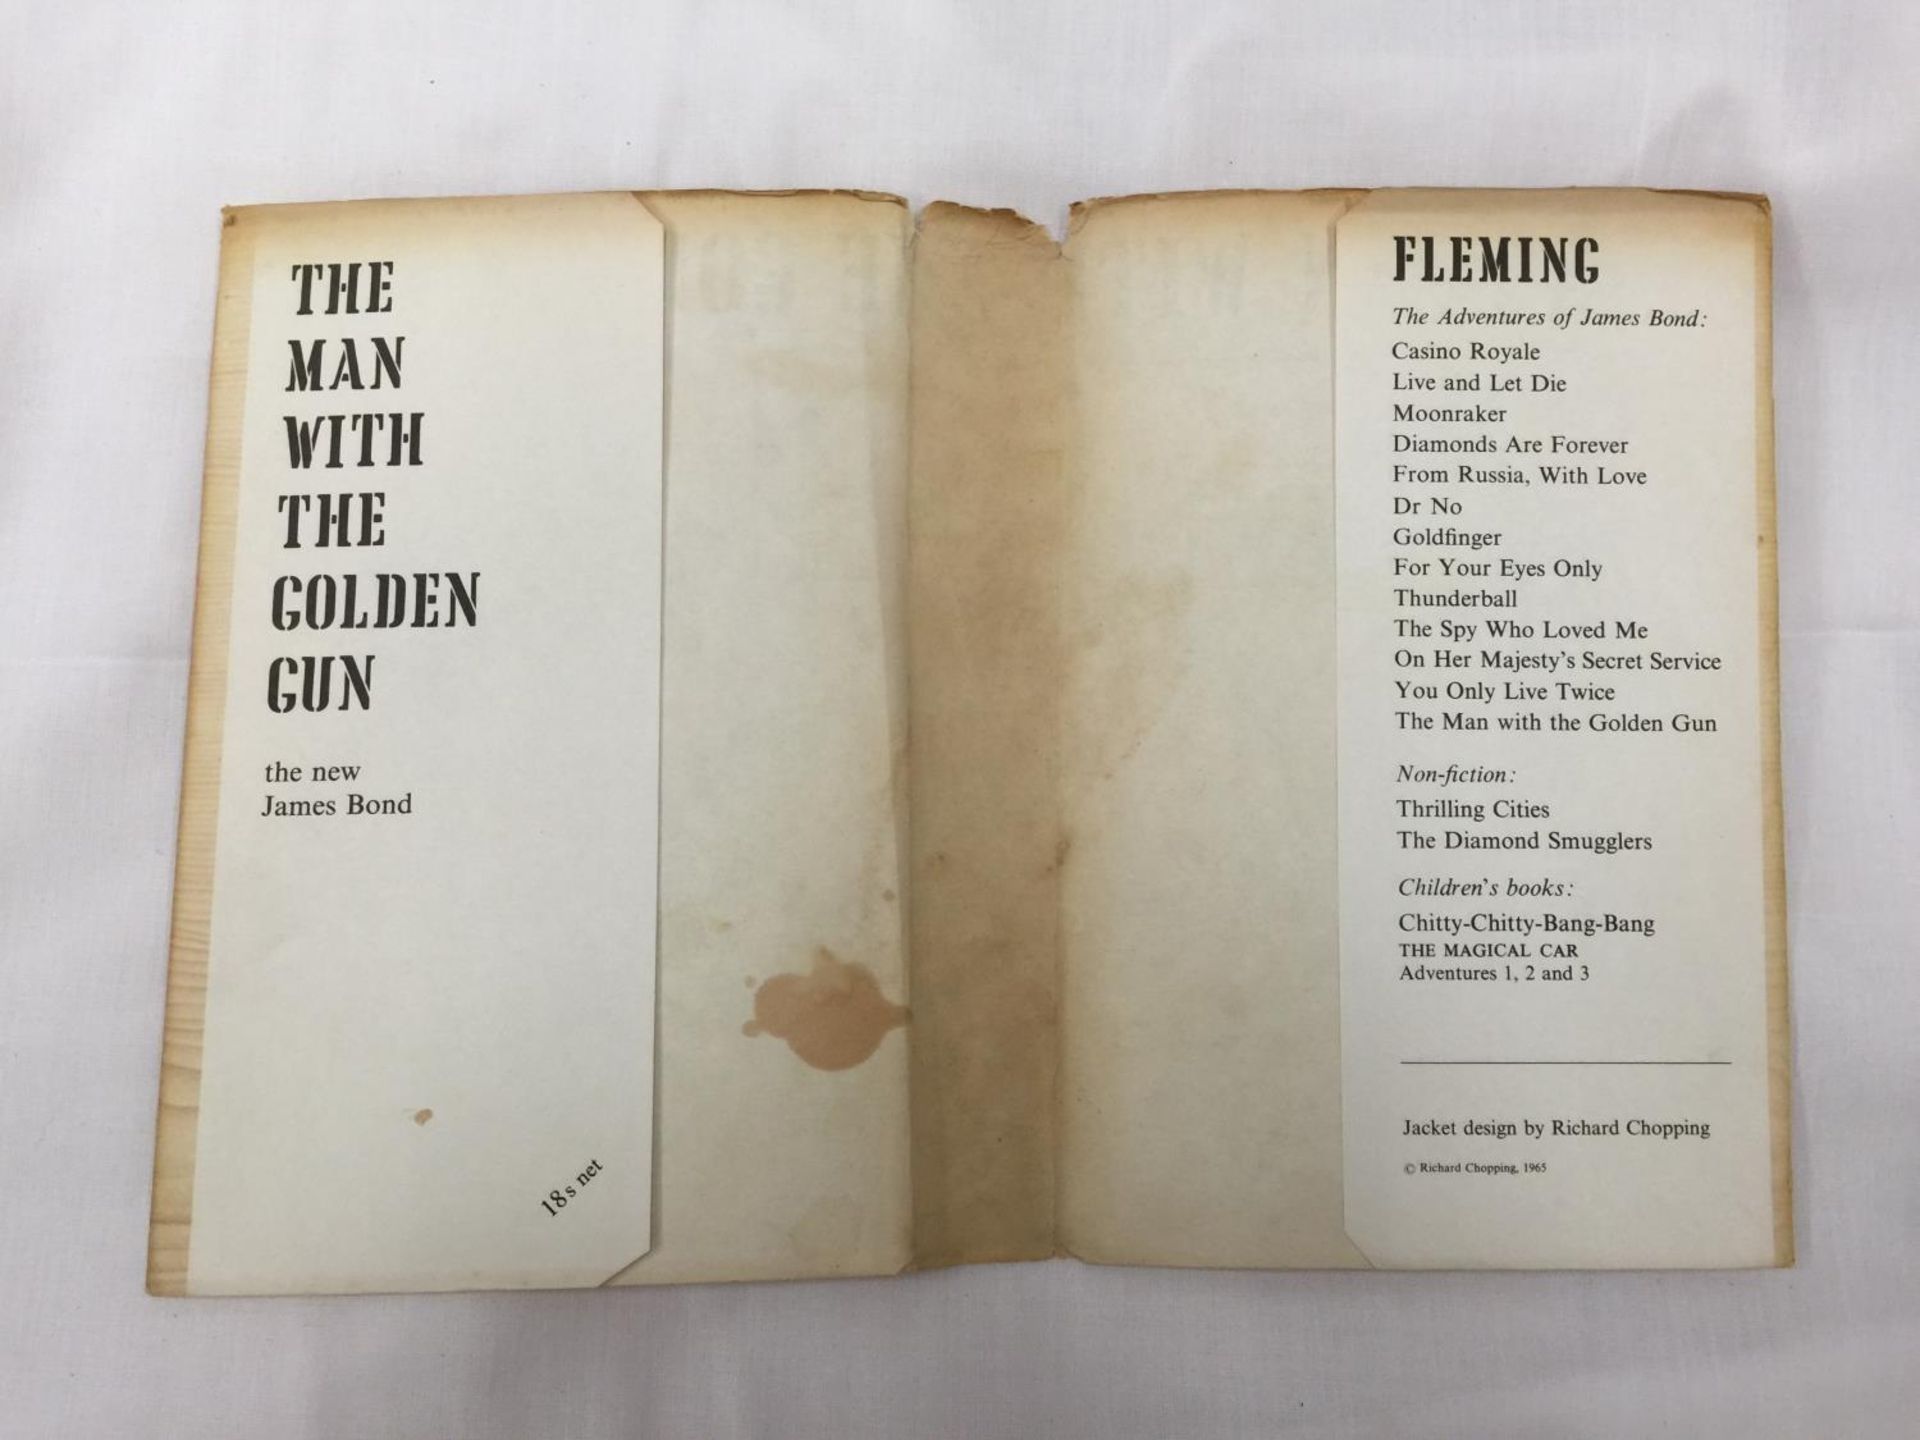 A FIRST EDITION JAMES BOND NOVEL - THE MAN WITH THE GOLDEN GUN BY IAN FLEMING, HARDBACK WITH DUST - Image 11 of 11